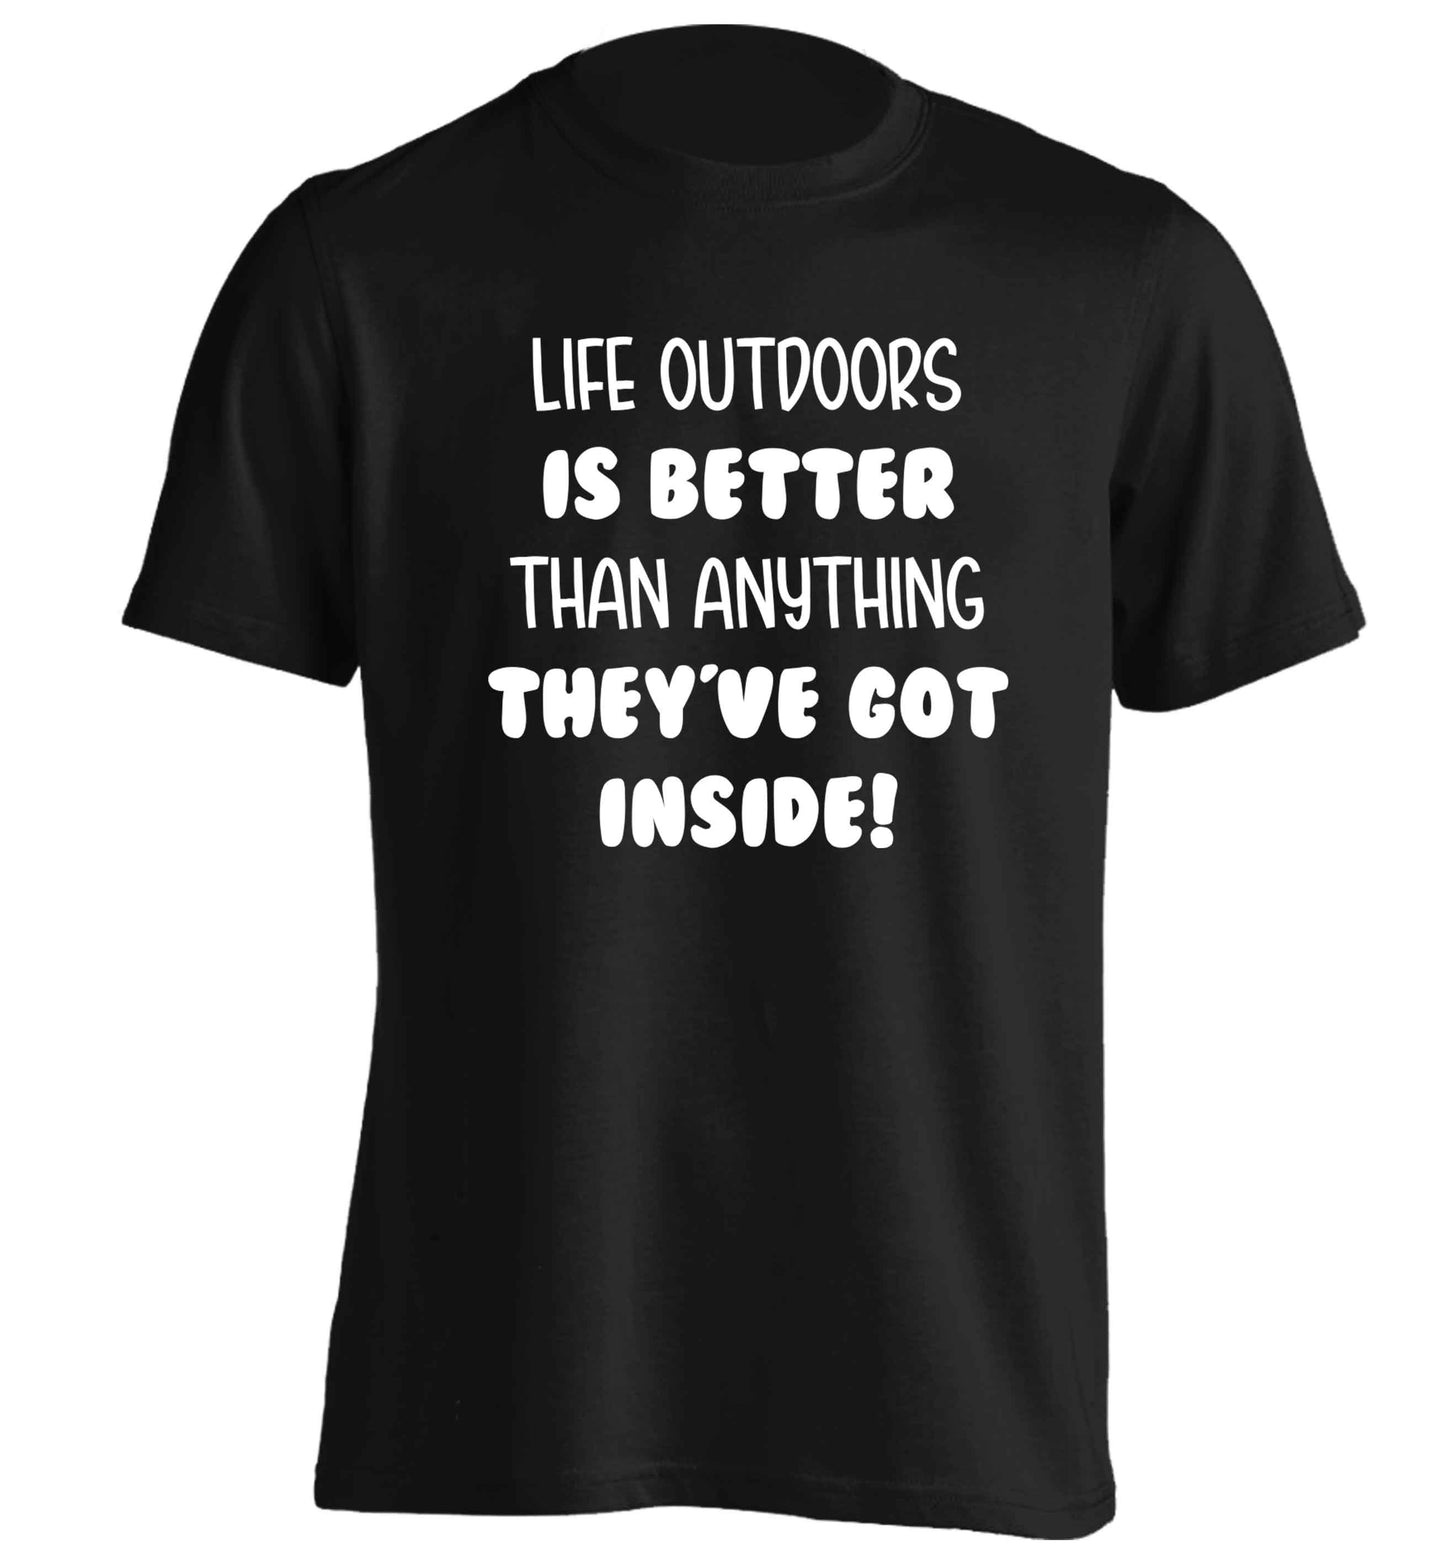 Life outdoors is better than anything they've go inside adults unisex black Tshirt 2XL